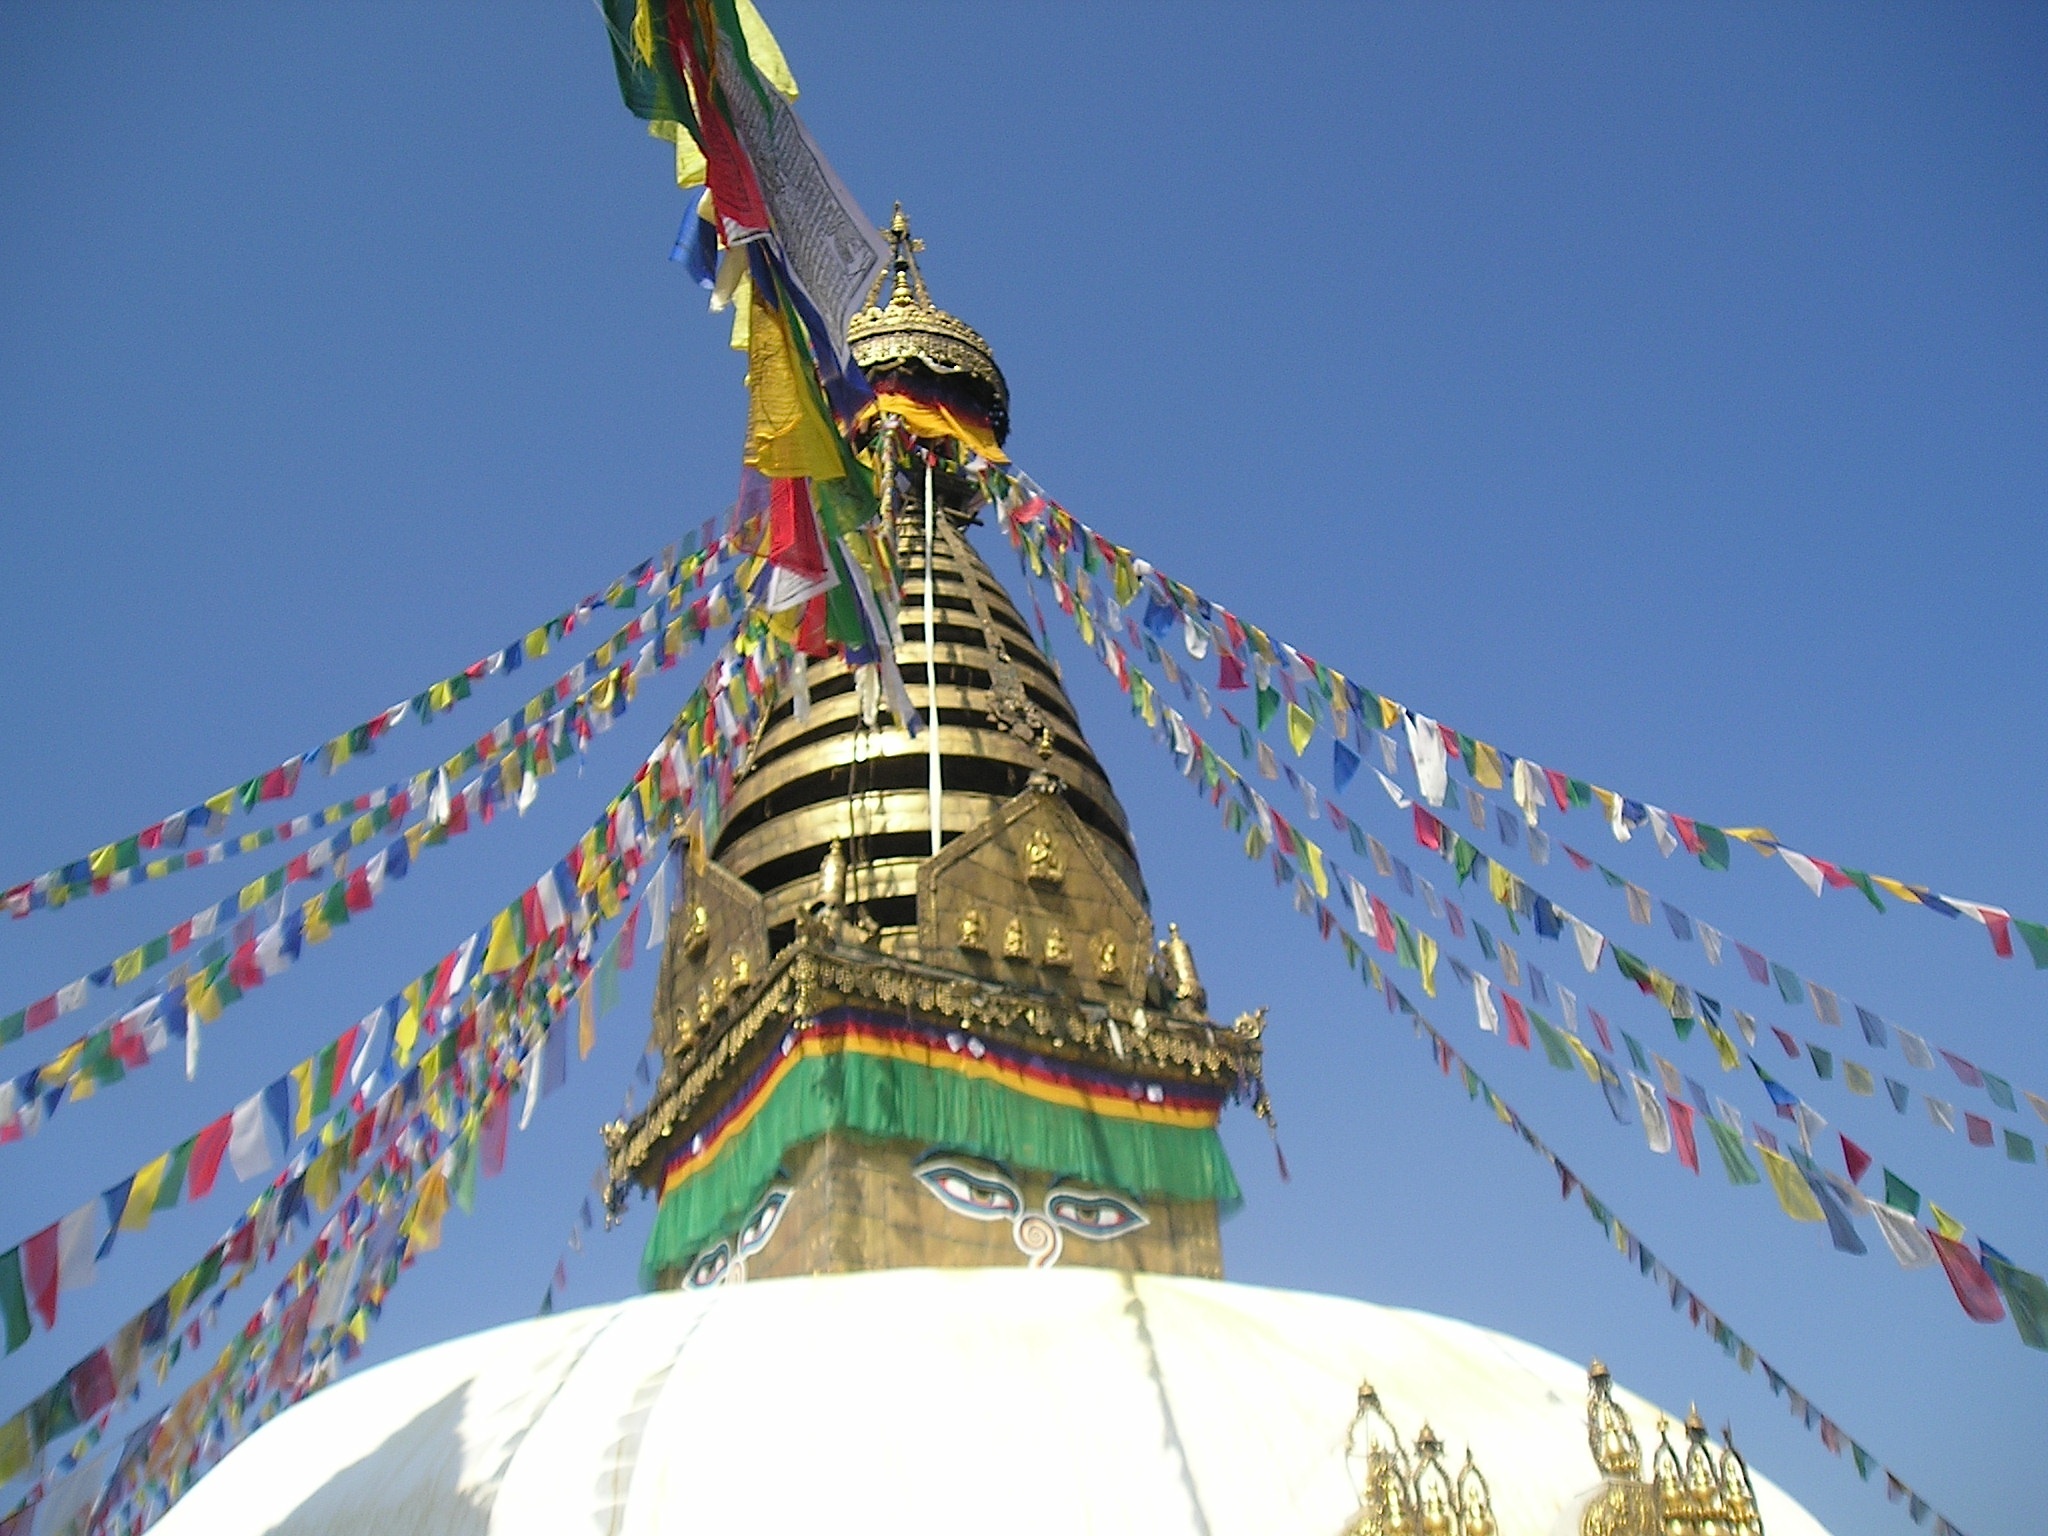 Swayambunath stupa and prayer flags in Kathmandu, Nepal. Image by Nancy Collins. This file is licensed under the Creative Commons Attribution-Share Alike 3.0 Unported license.